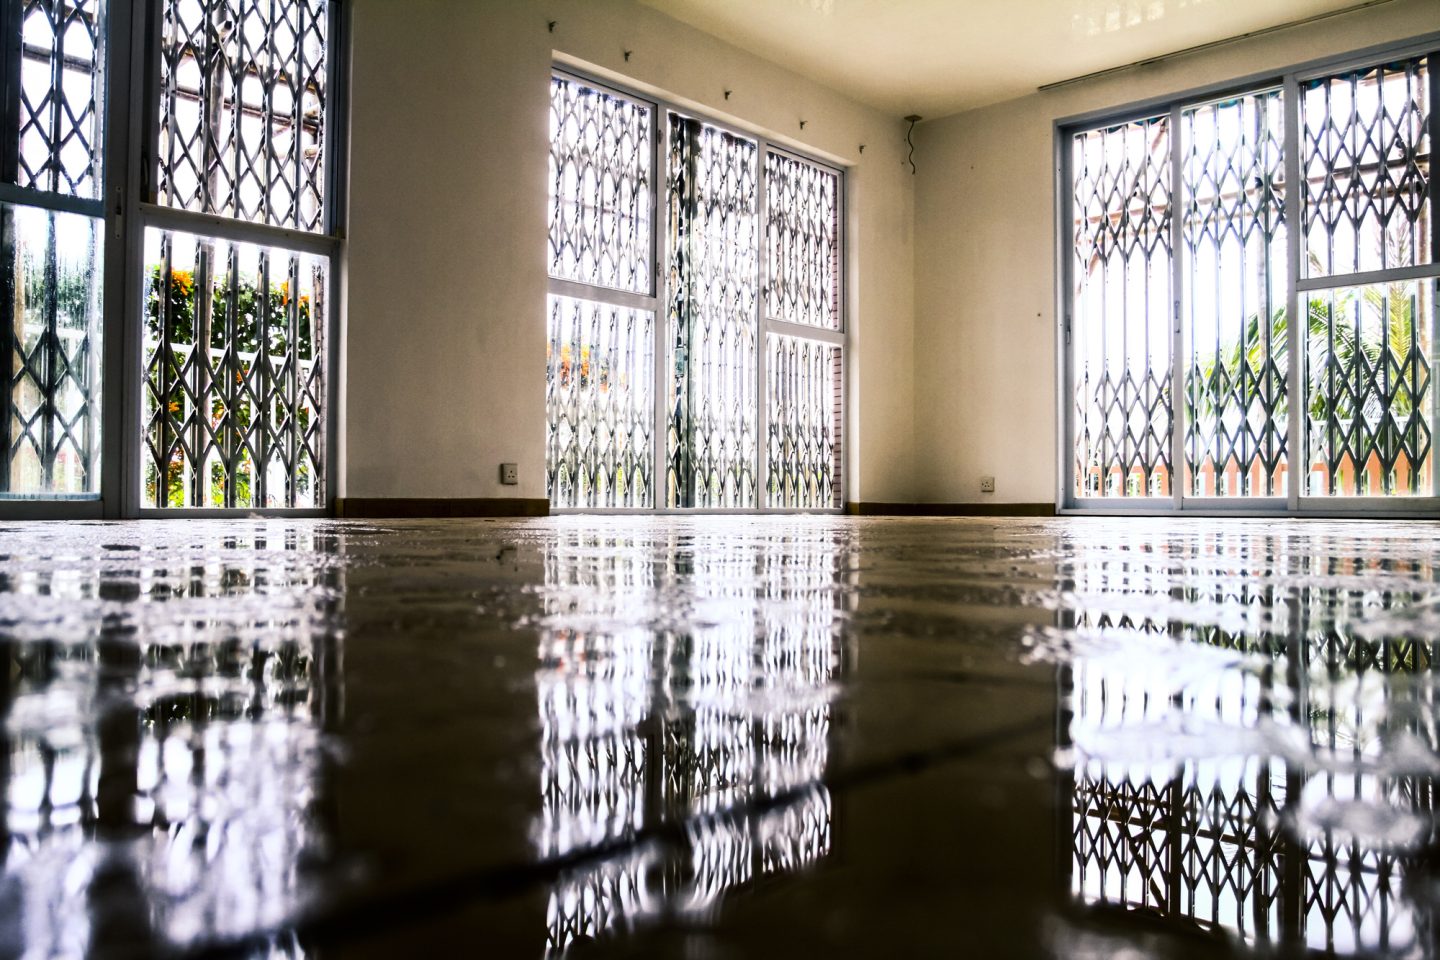 5 Tips for Choosing a Water Damage Company